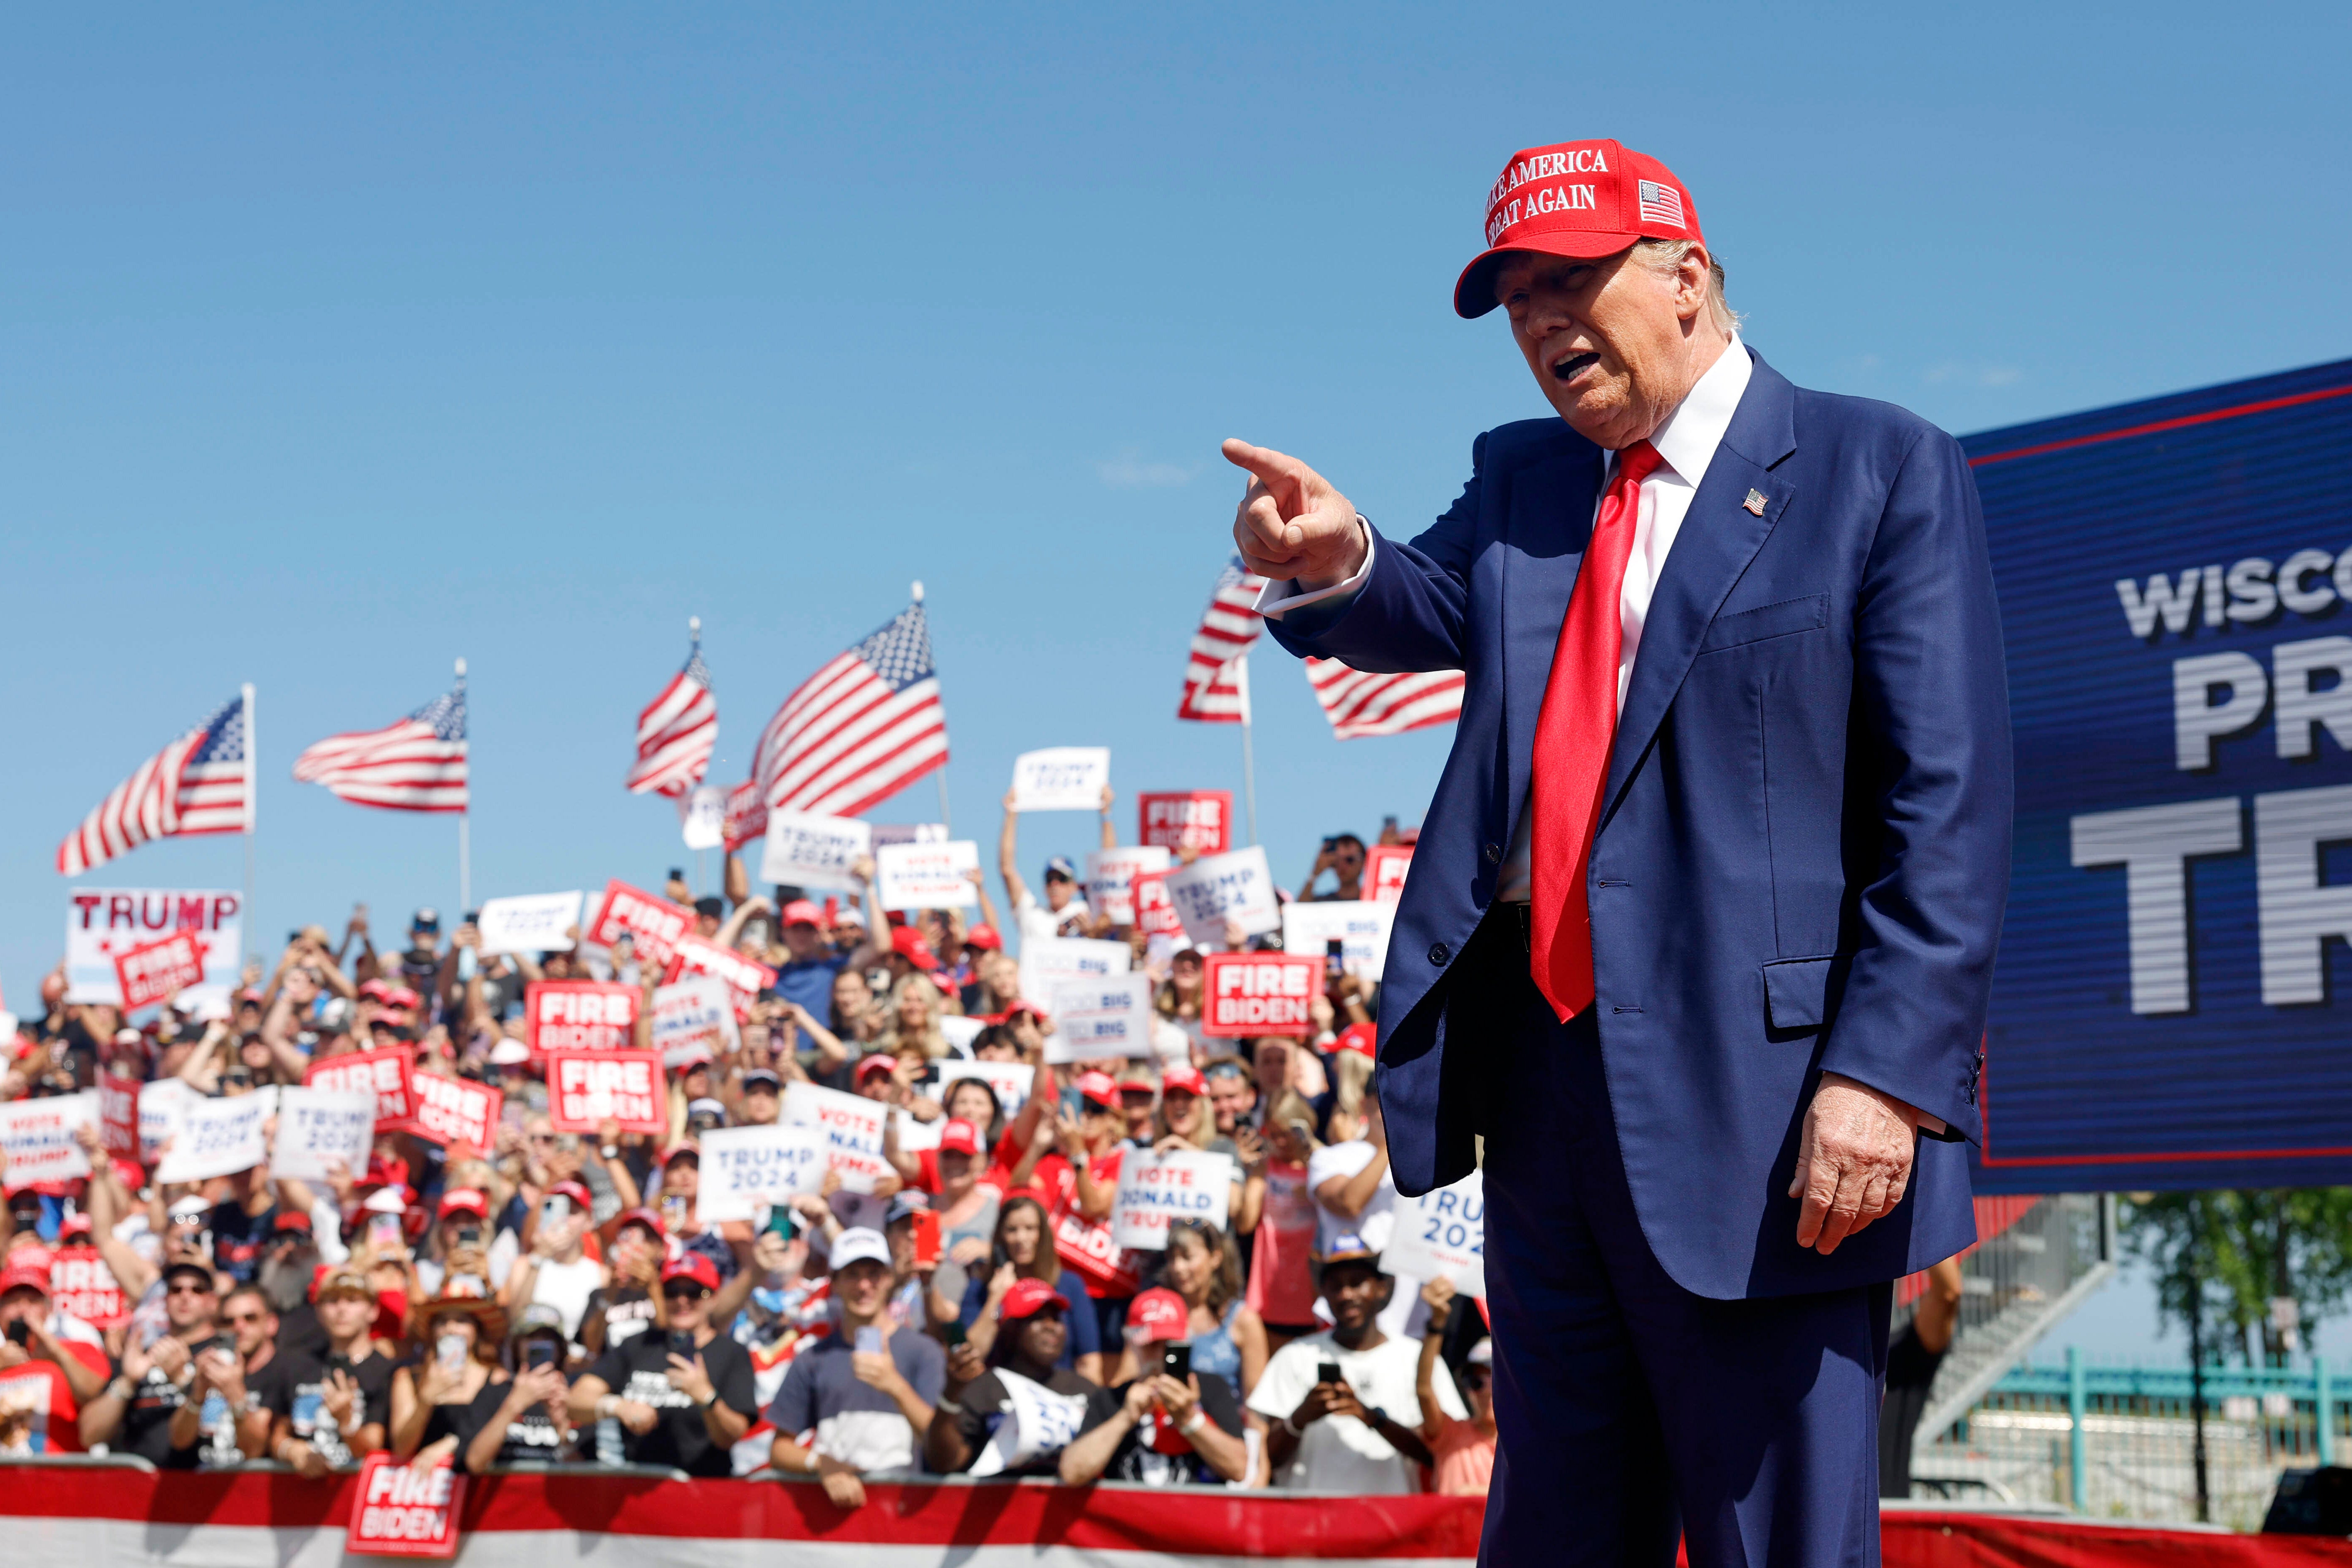 Donald Trump speaks to supporters in Wisconsin on June 19. He called Joe Biden’s student debt relief plans ‘vile’ and suggested they would be ‘rebuked’ in court.